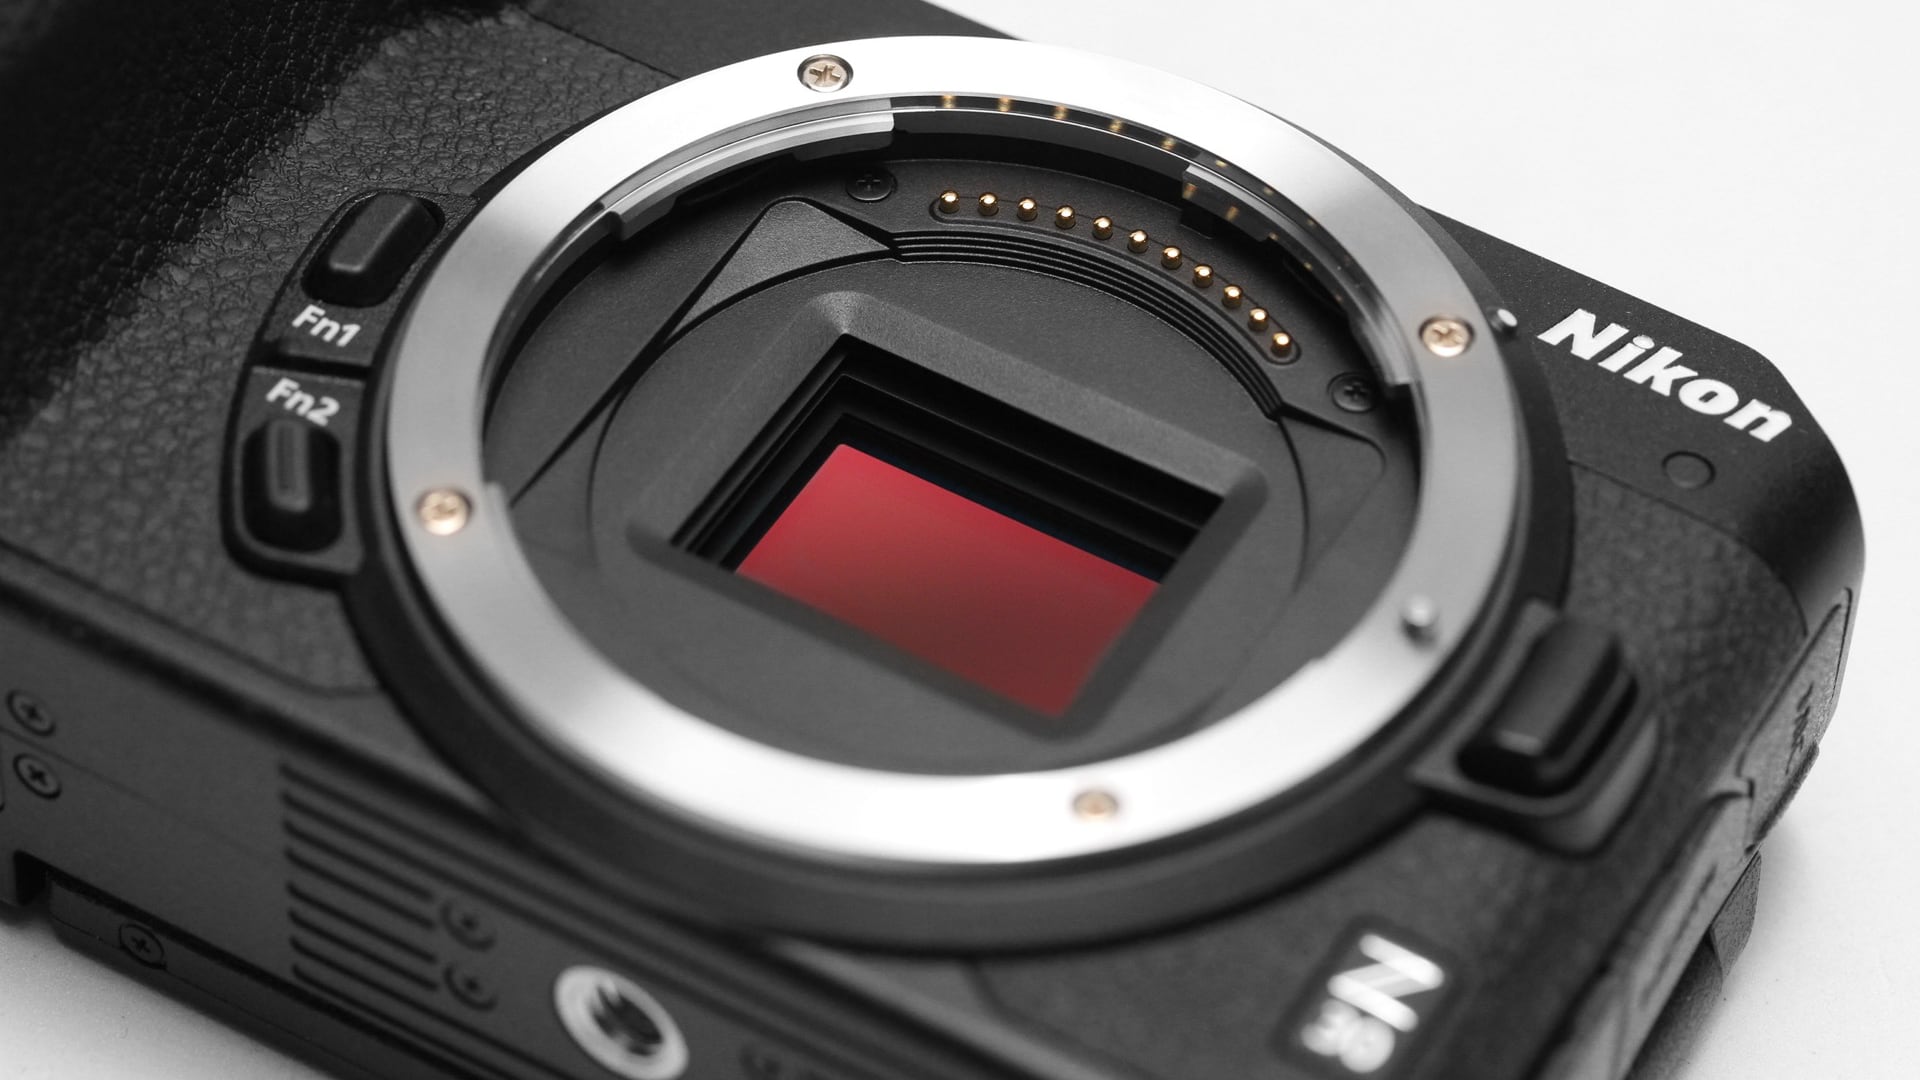 Nikon_Z_is_a_wide,_shallow_mount,_and_the_Z_30_will_take_a_huge_range_of_lenses_which_completely_dwarf_the_camera